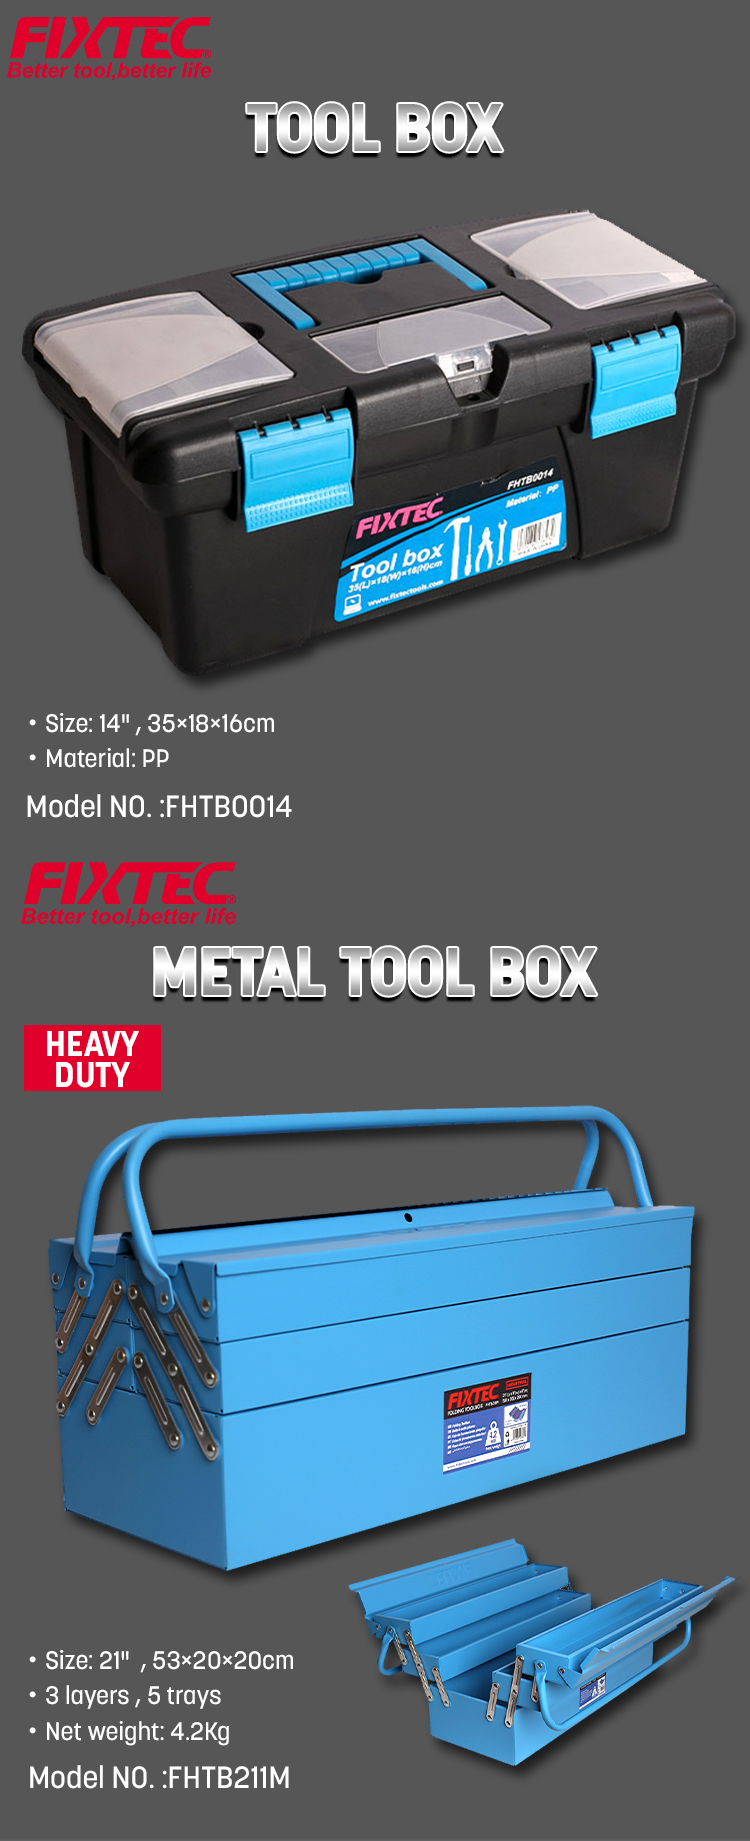 14 Tool Box from China manufacturer - EBIC Tools